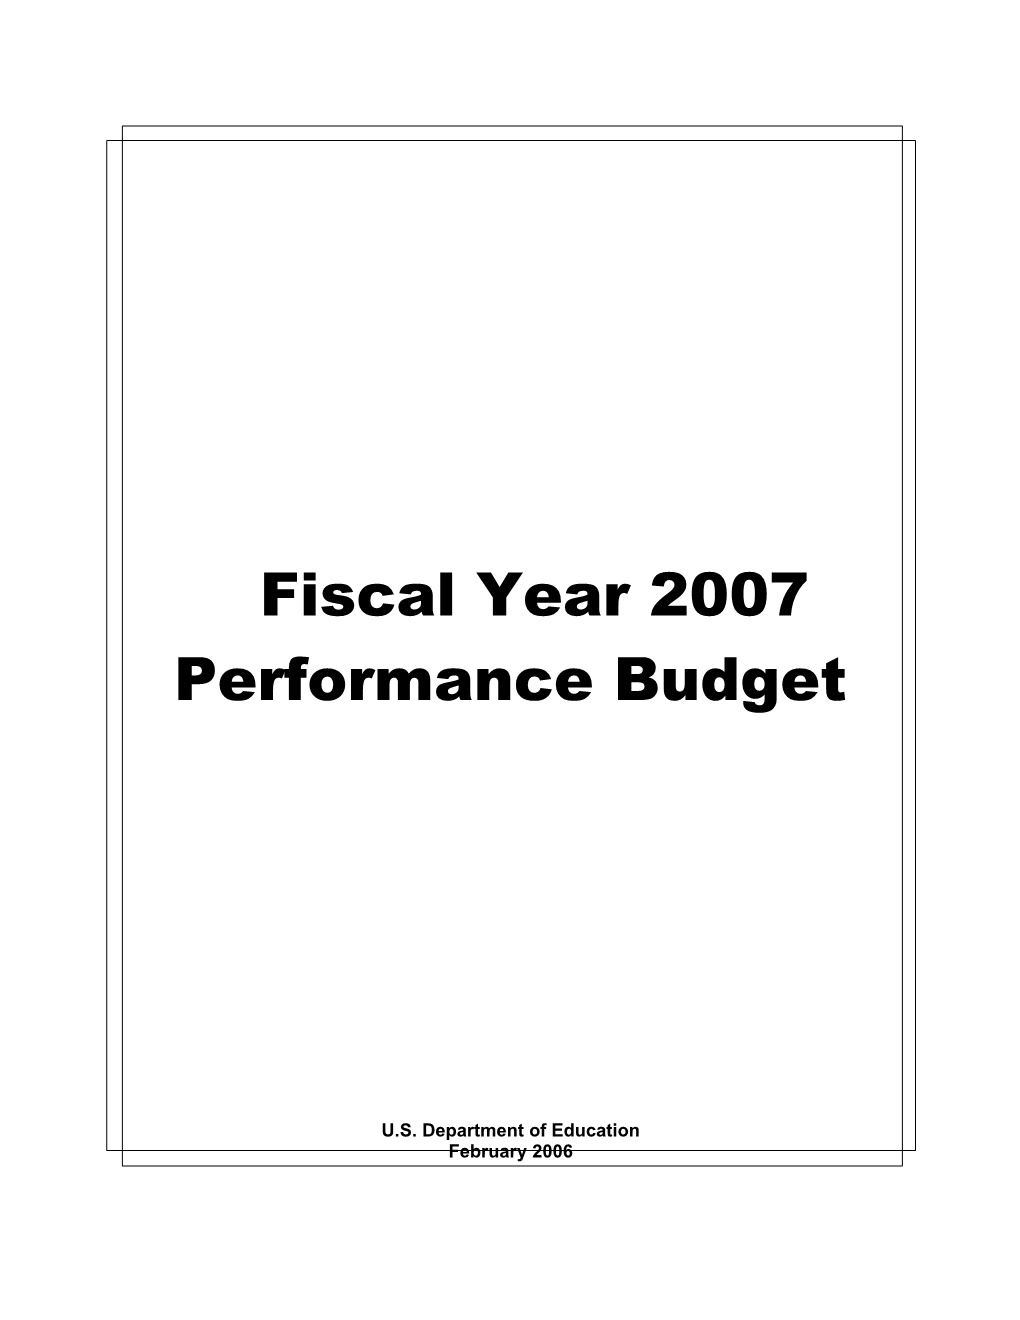 FY 2007 Performance Budget (Msword)